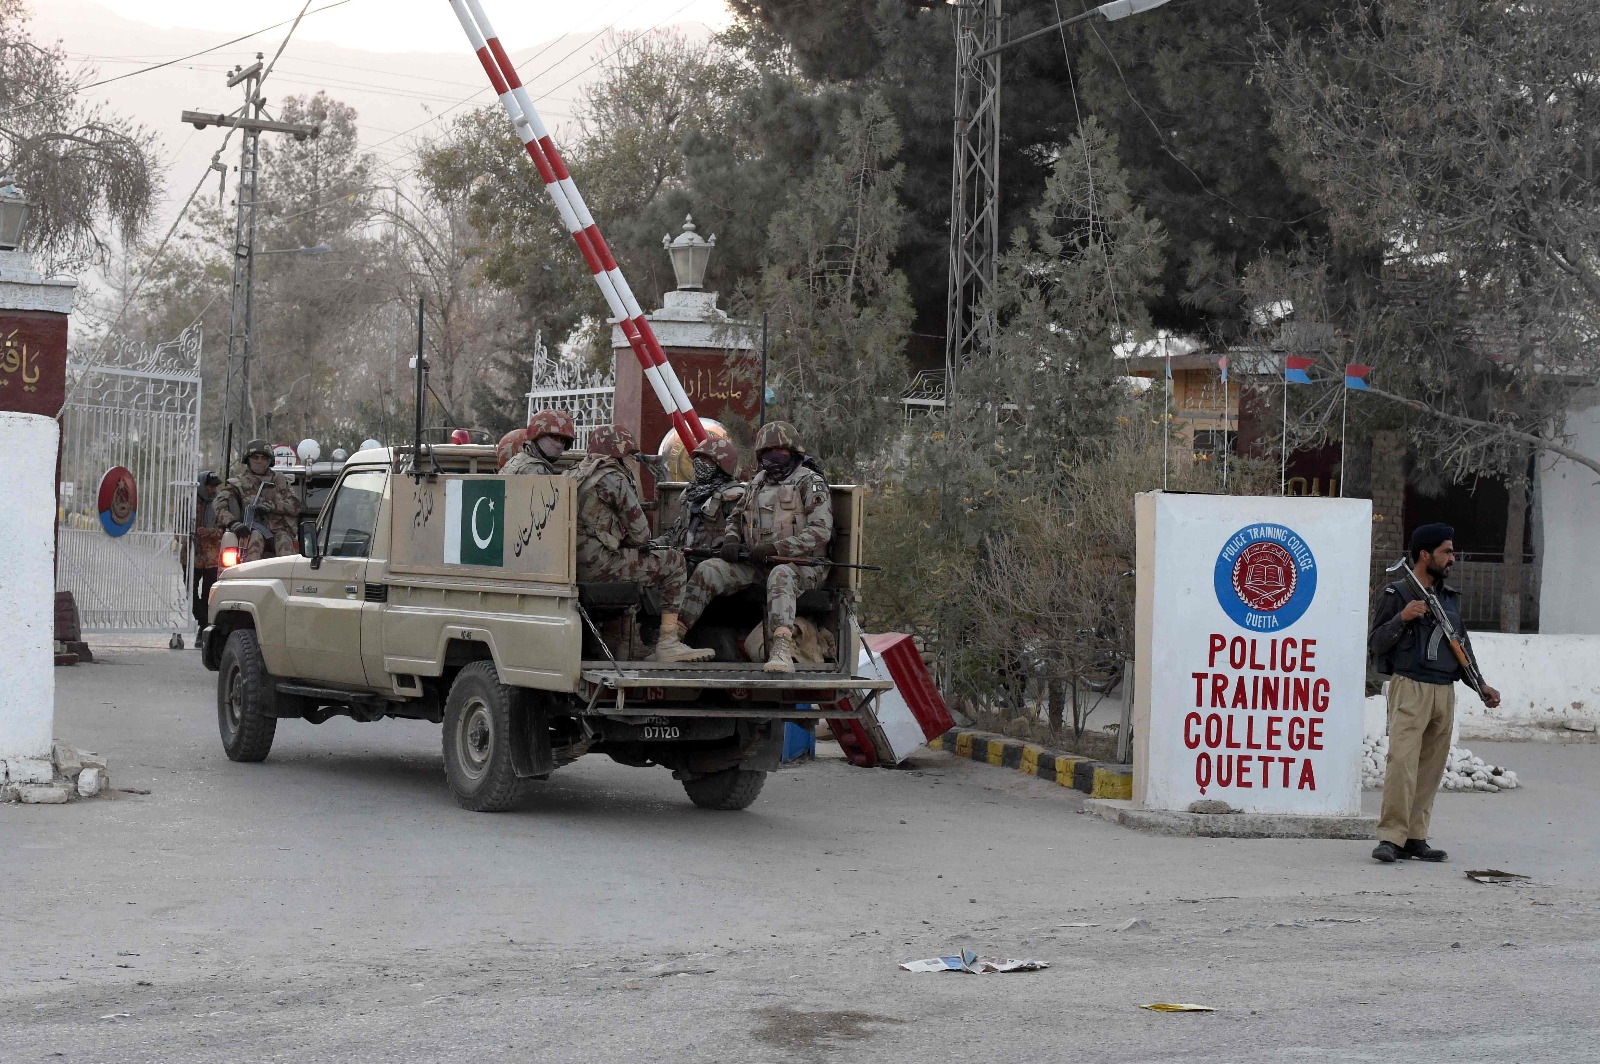 Pakistani soldiers pass through the entrance to The Police Training College in Quetta.